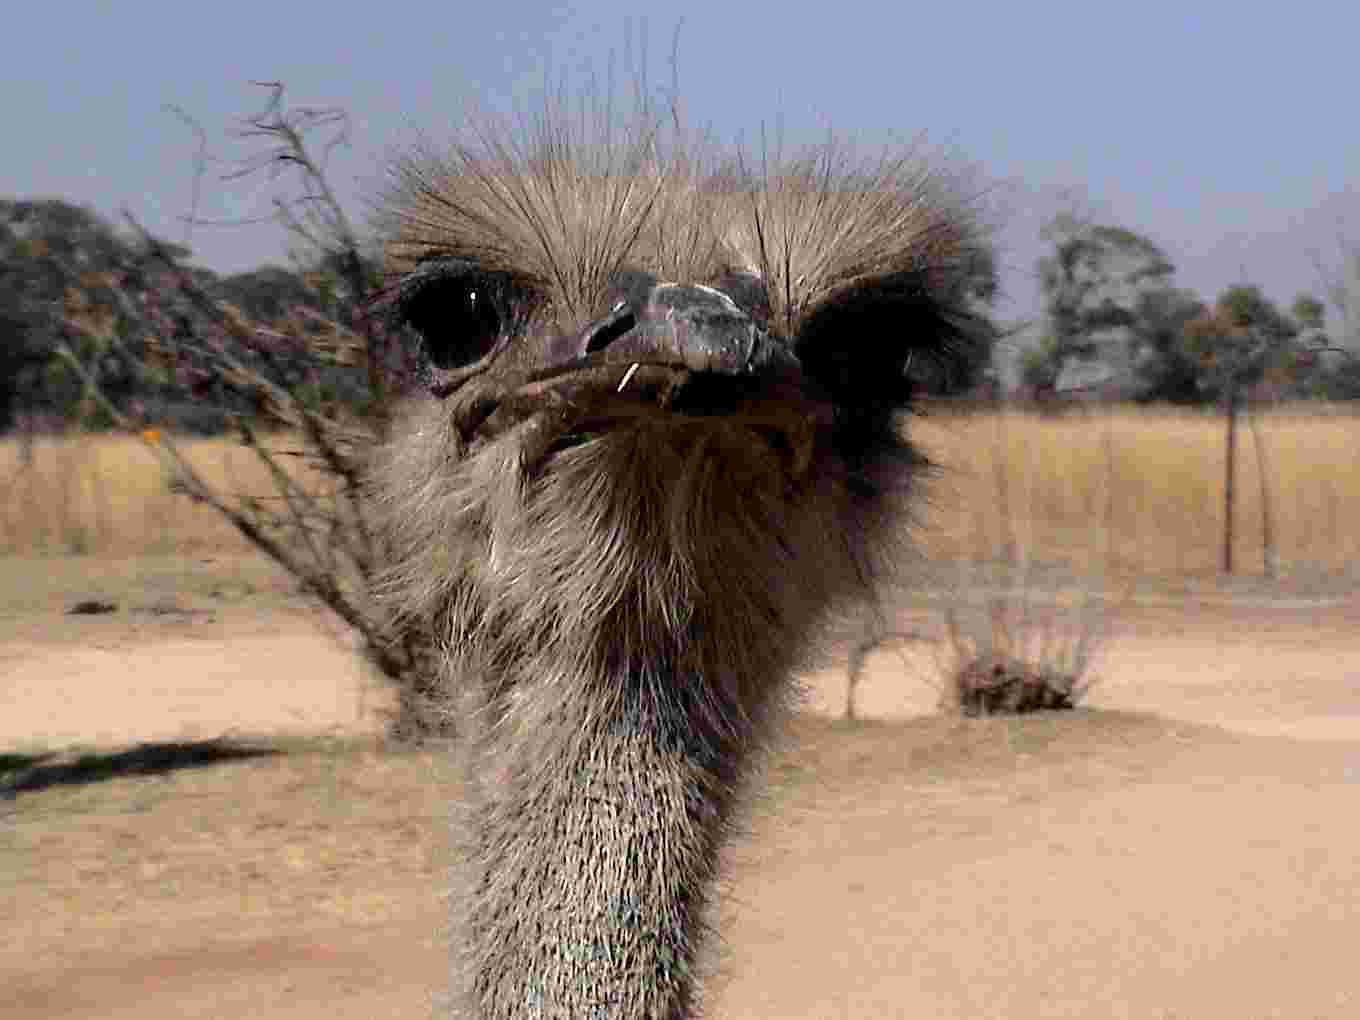 My picture of the ostrich